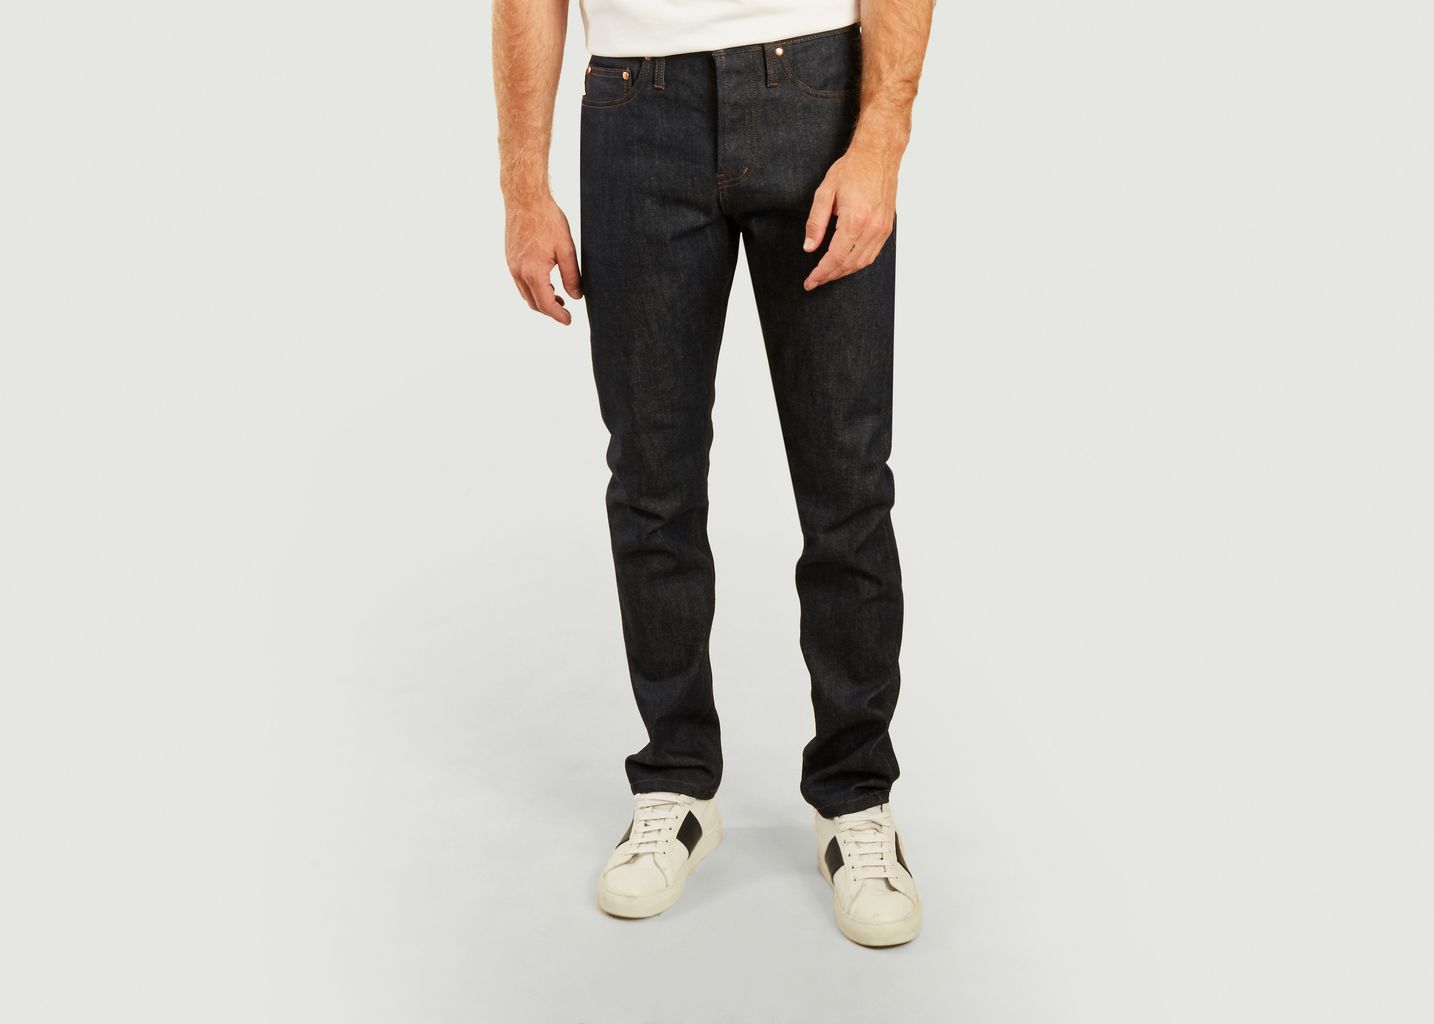 Jean UB201 tapered 14.5oz selvedge - The Unbranded Brand